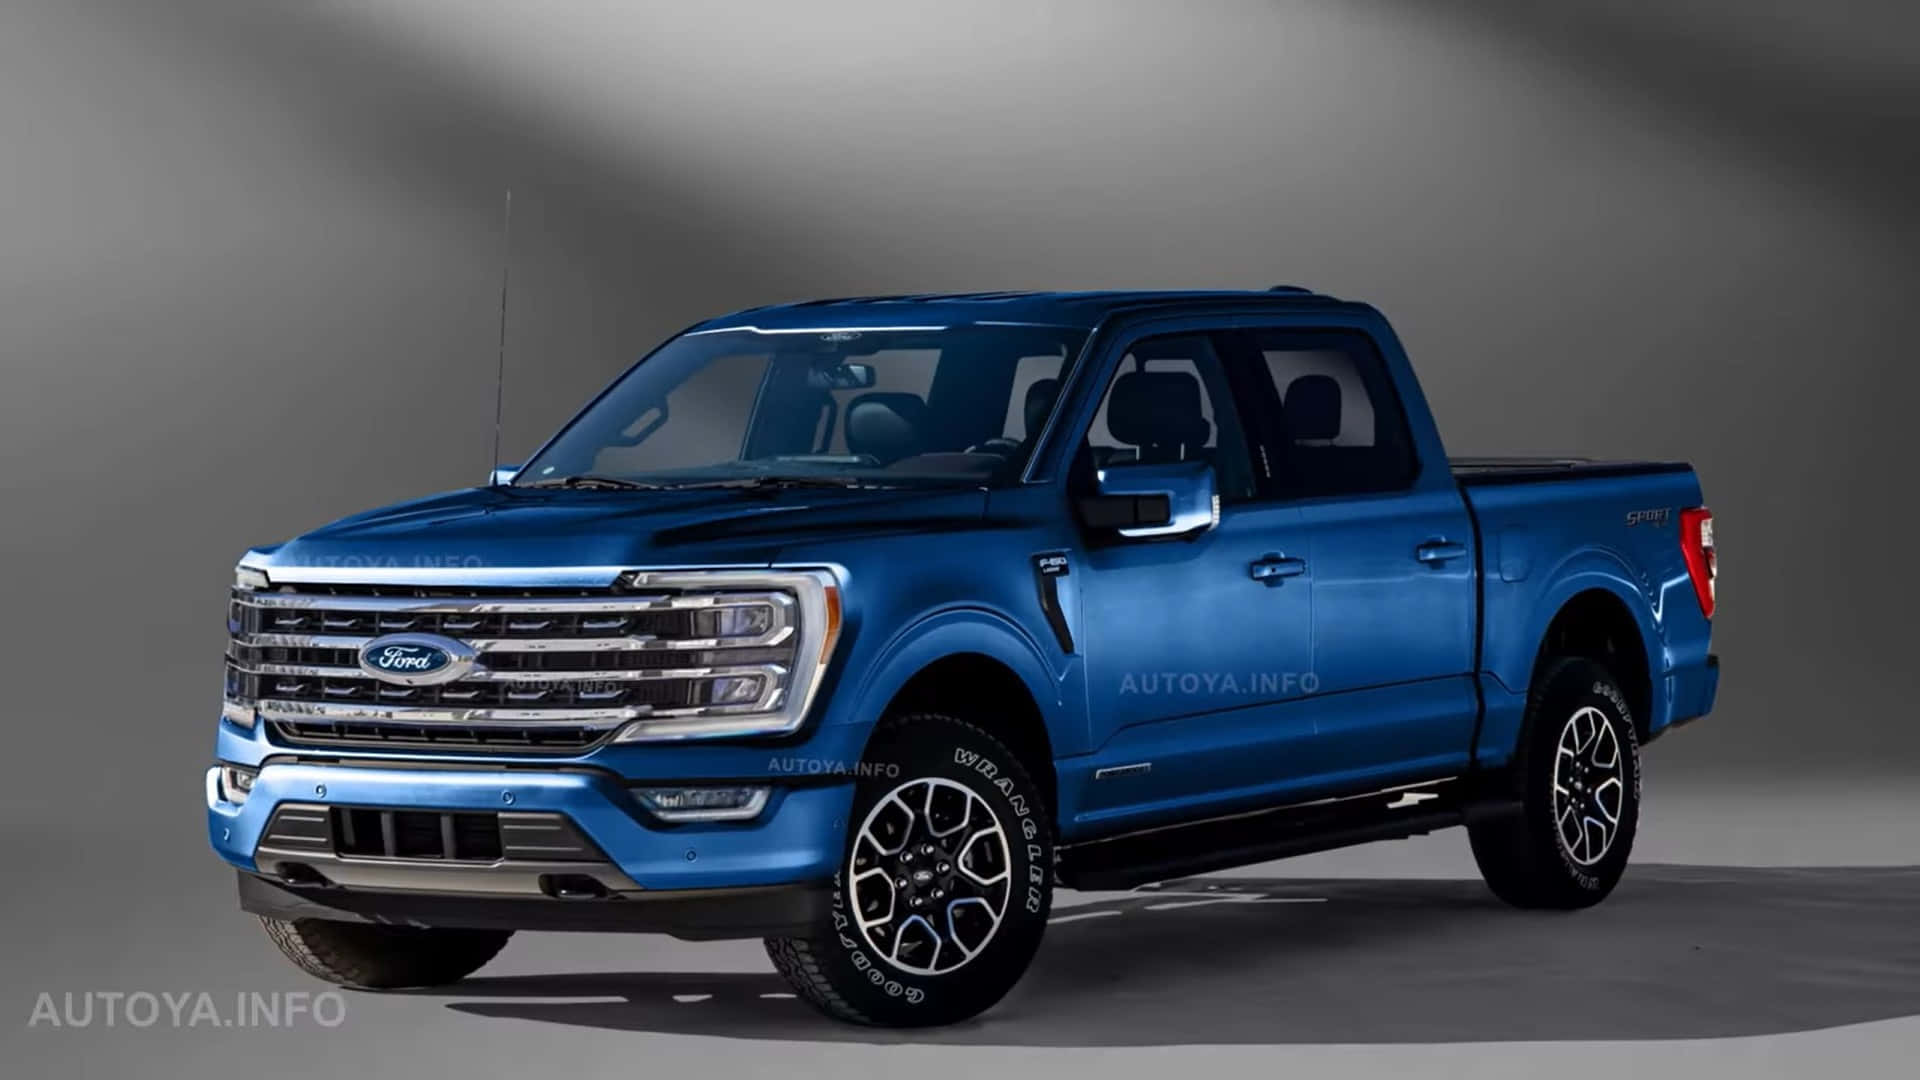 The 2020 Ford F-150 Is Shown In A Rendering